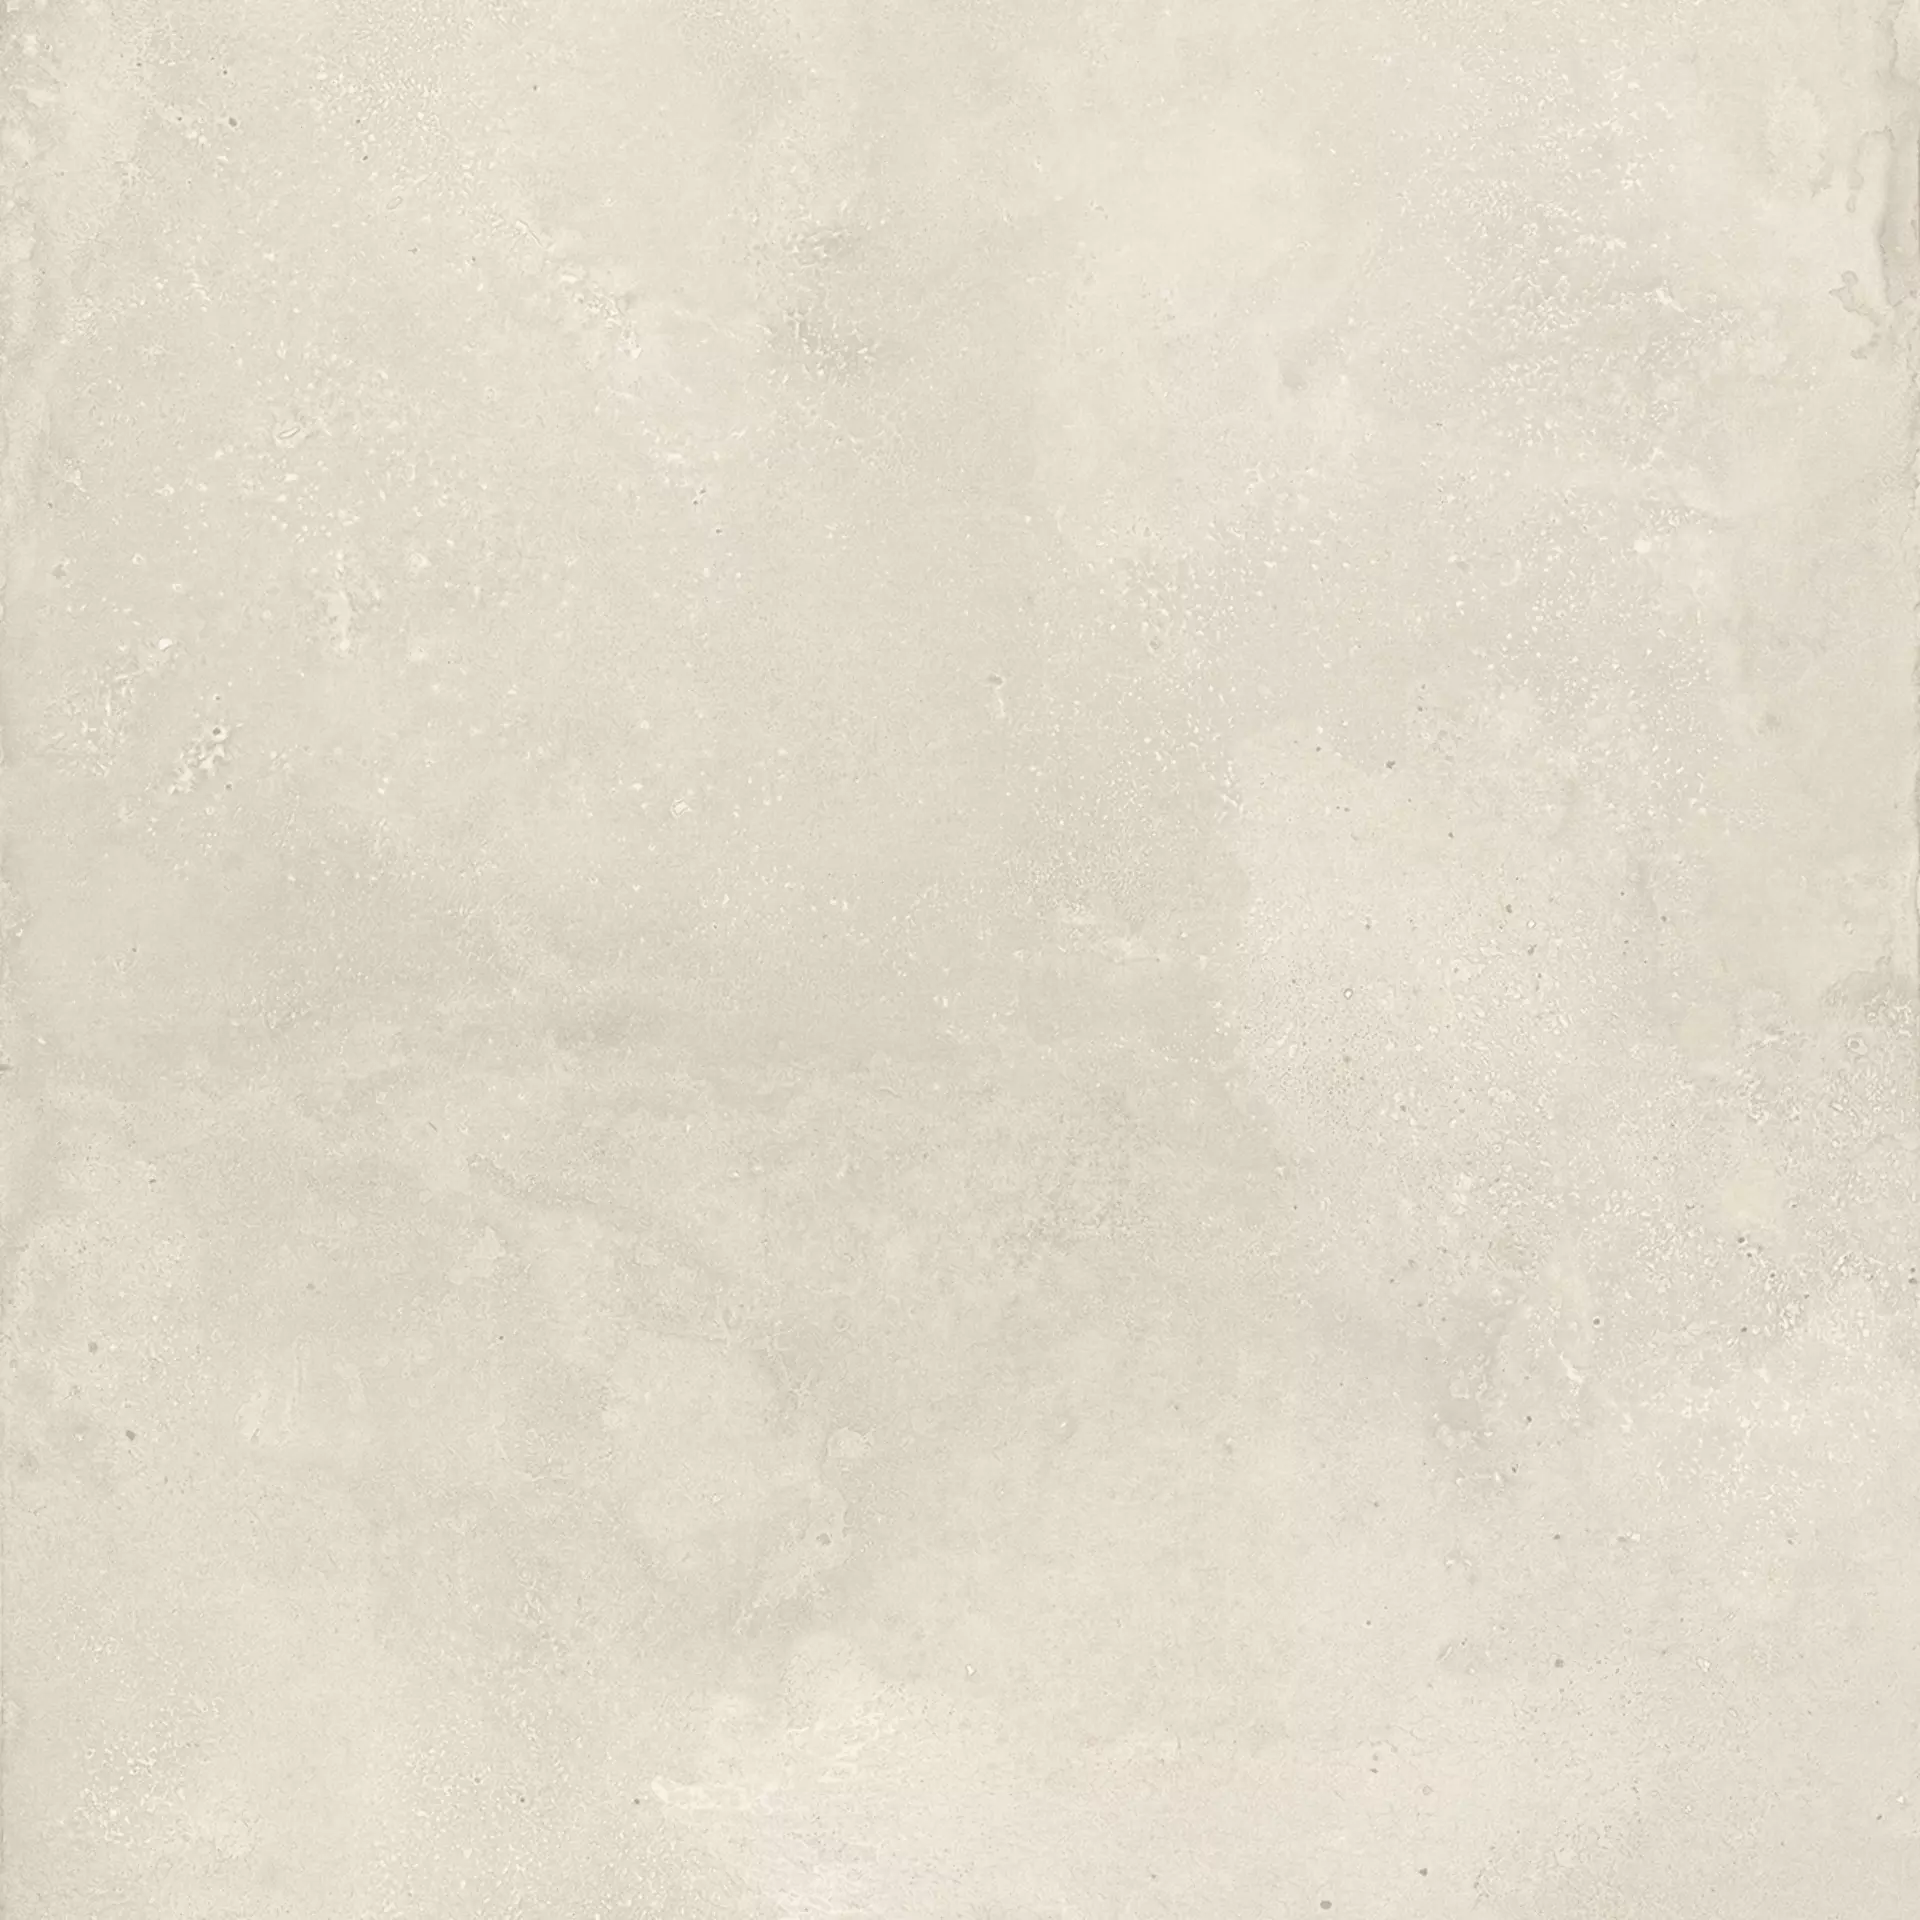 Fondovalle Pigmento Gesso Natural PGM008 120x120cm rectified 6,5mm